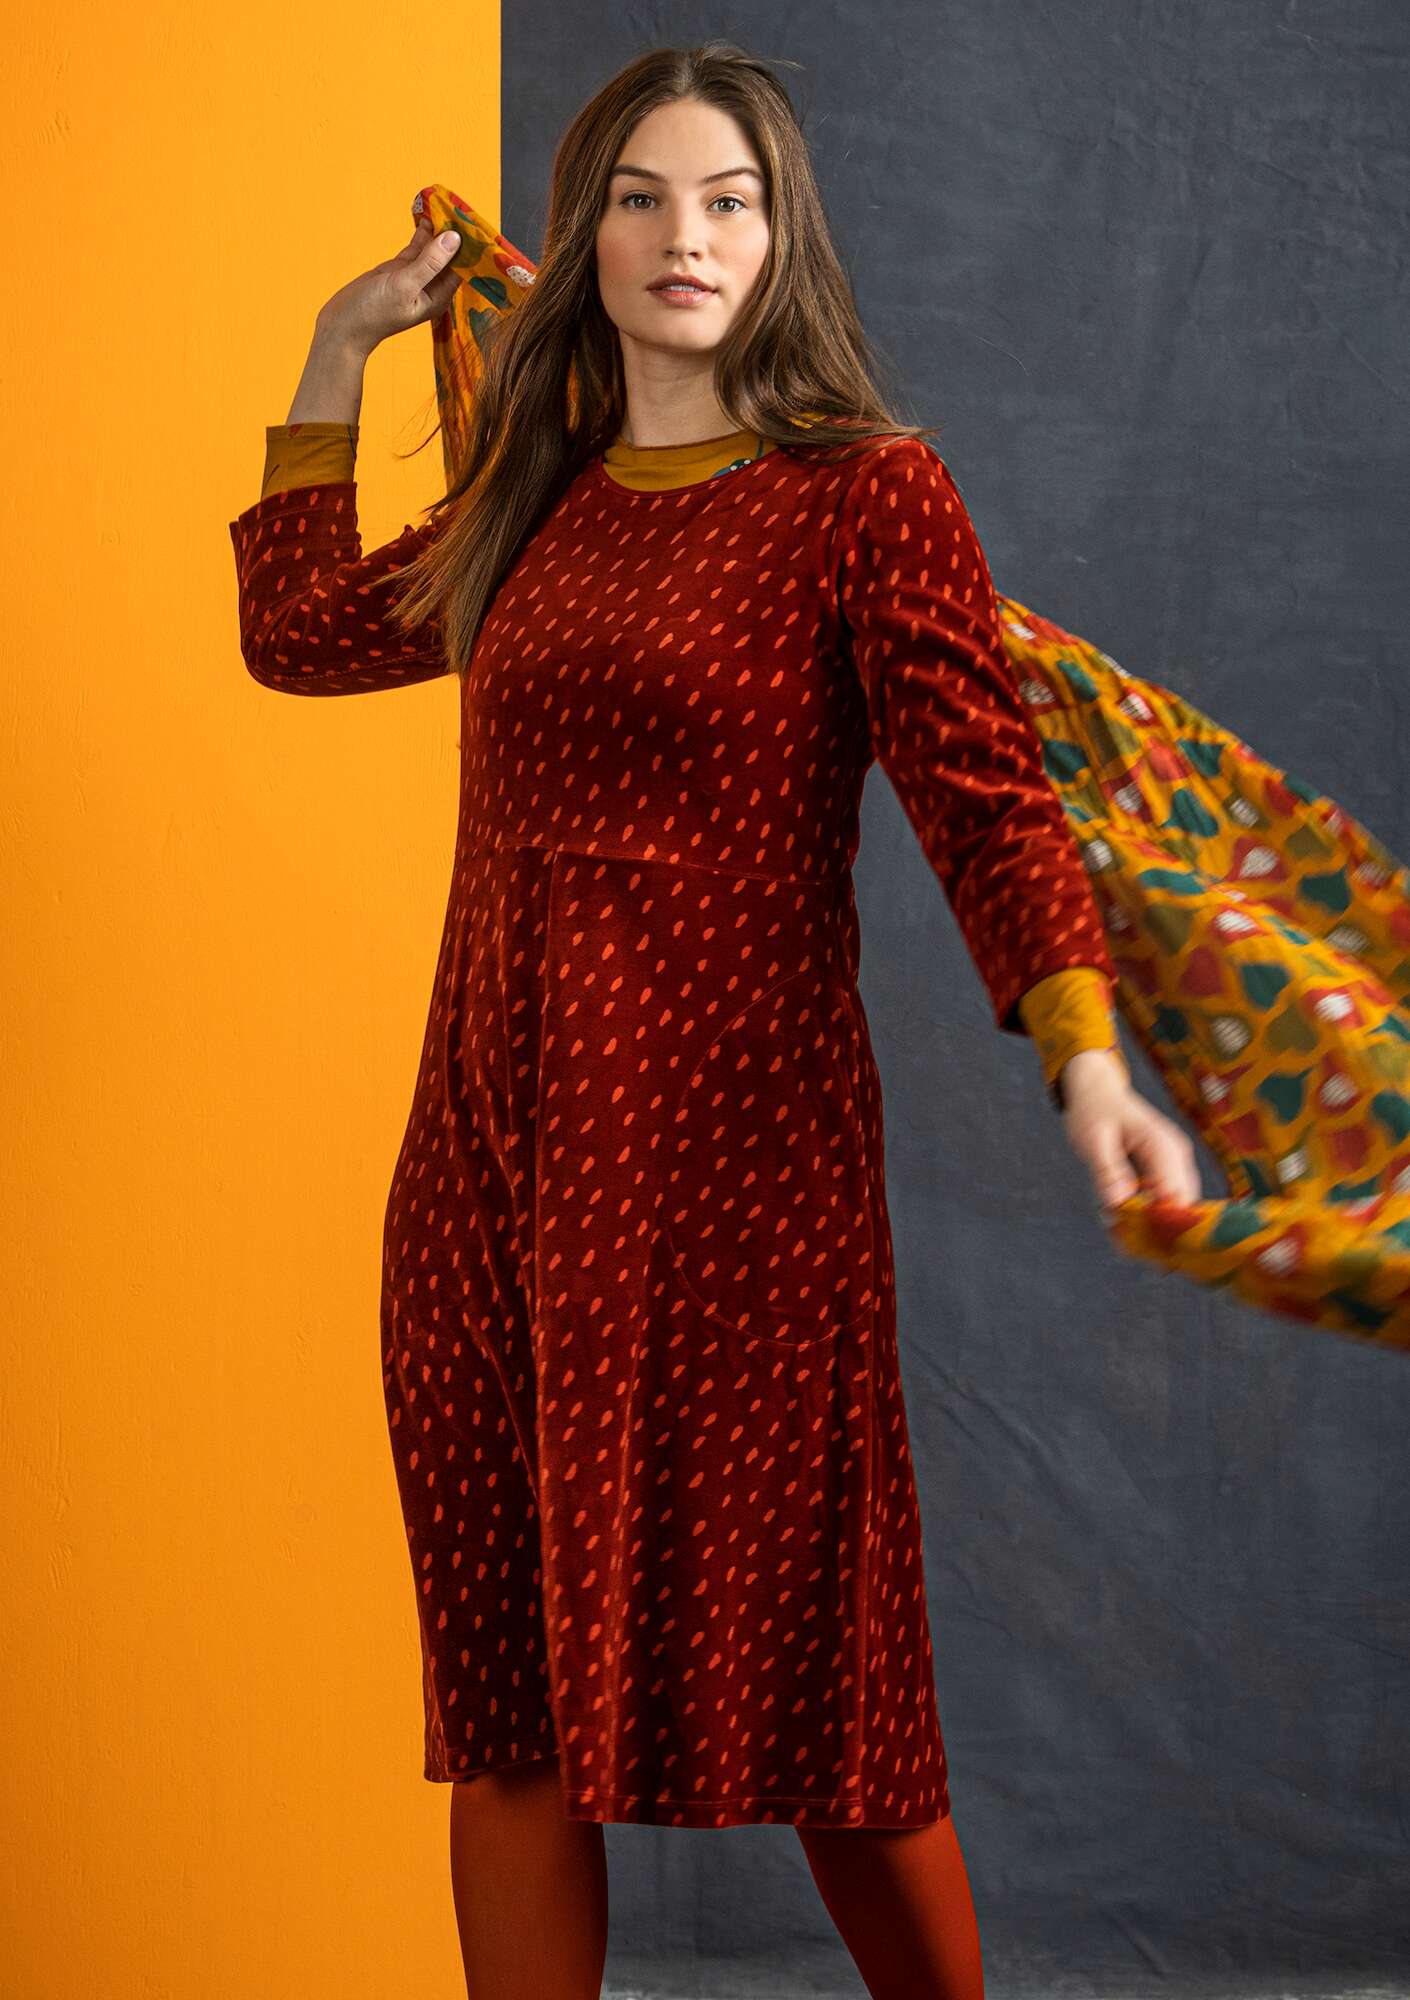 “Fauna” velour dress in organic cotton/recycled polyester chili/patterned thumbnail